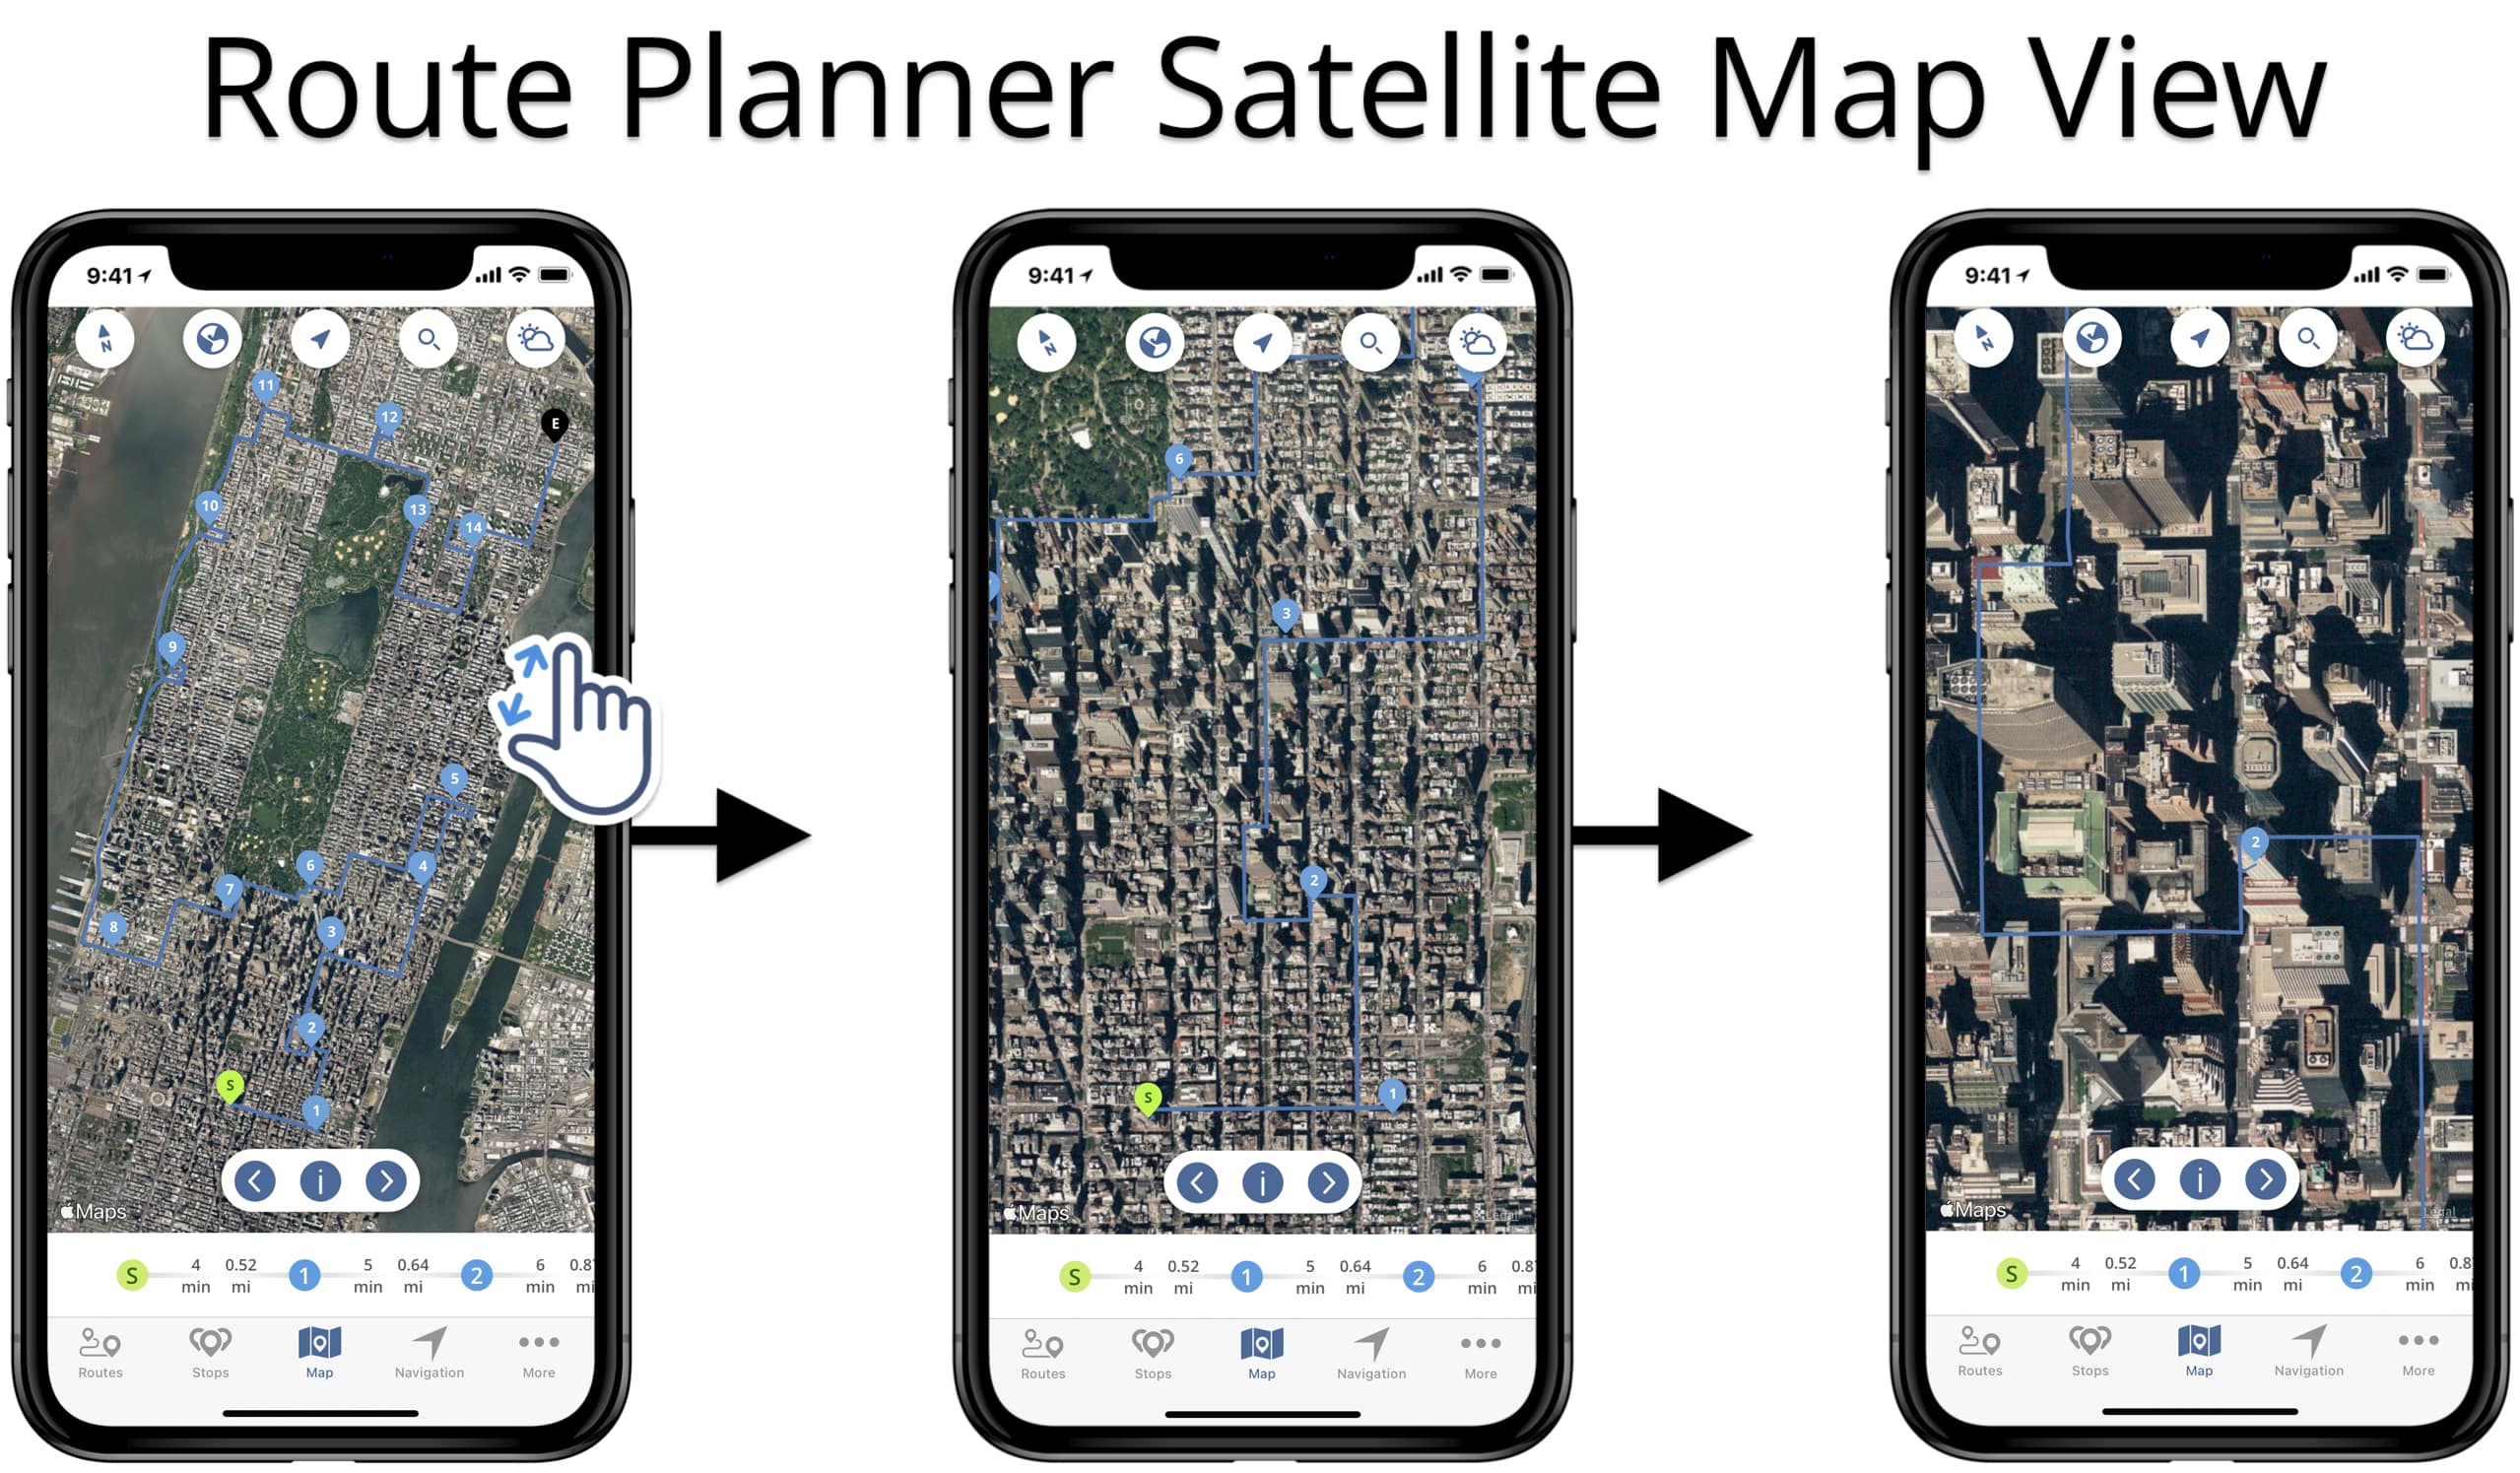 Enable the satellite view and open route on the satellite map on Route4Me's iOS Route Planner.